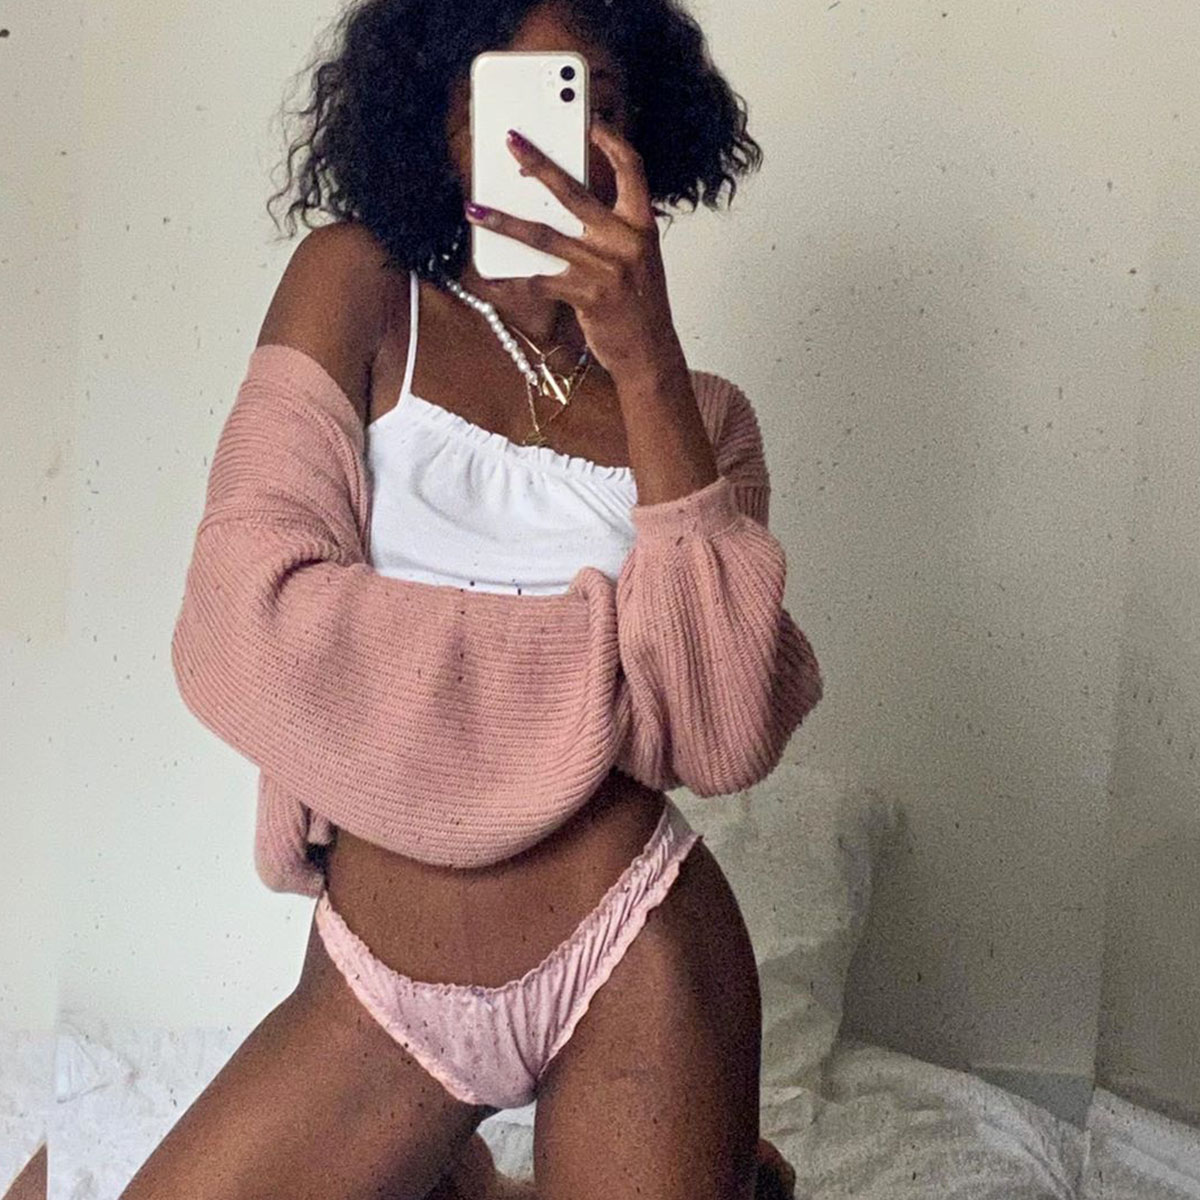 Bloomers Are the Ugly Underwear Trend That's Everywhere RN